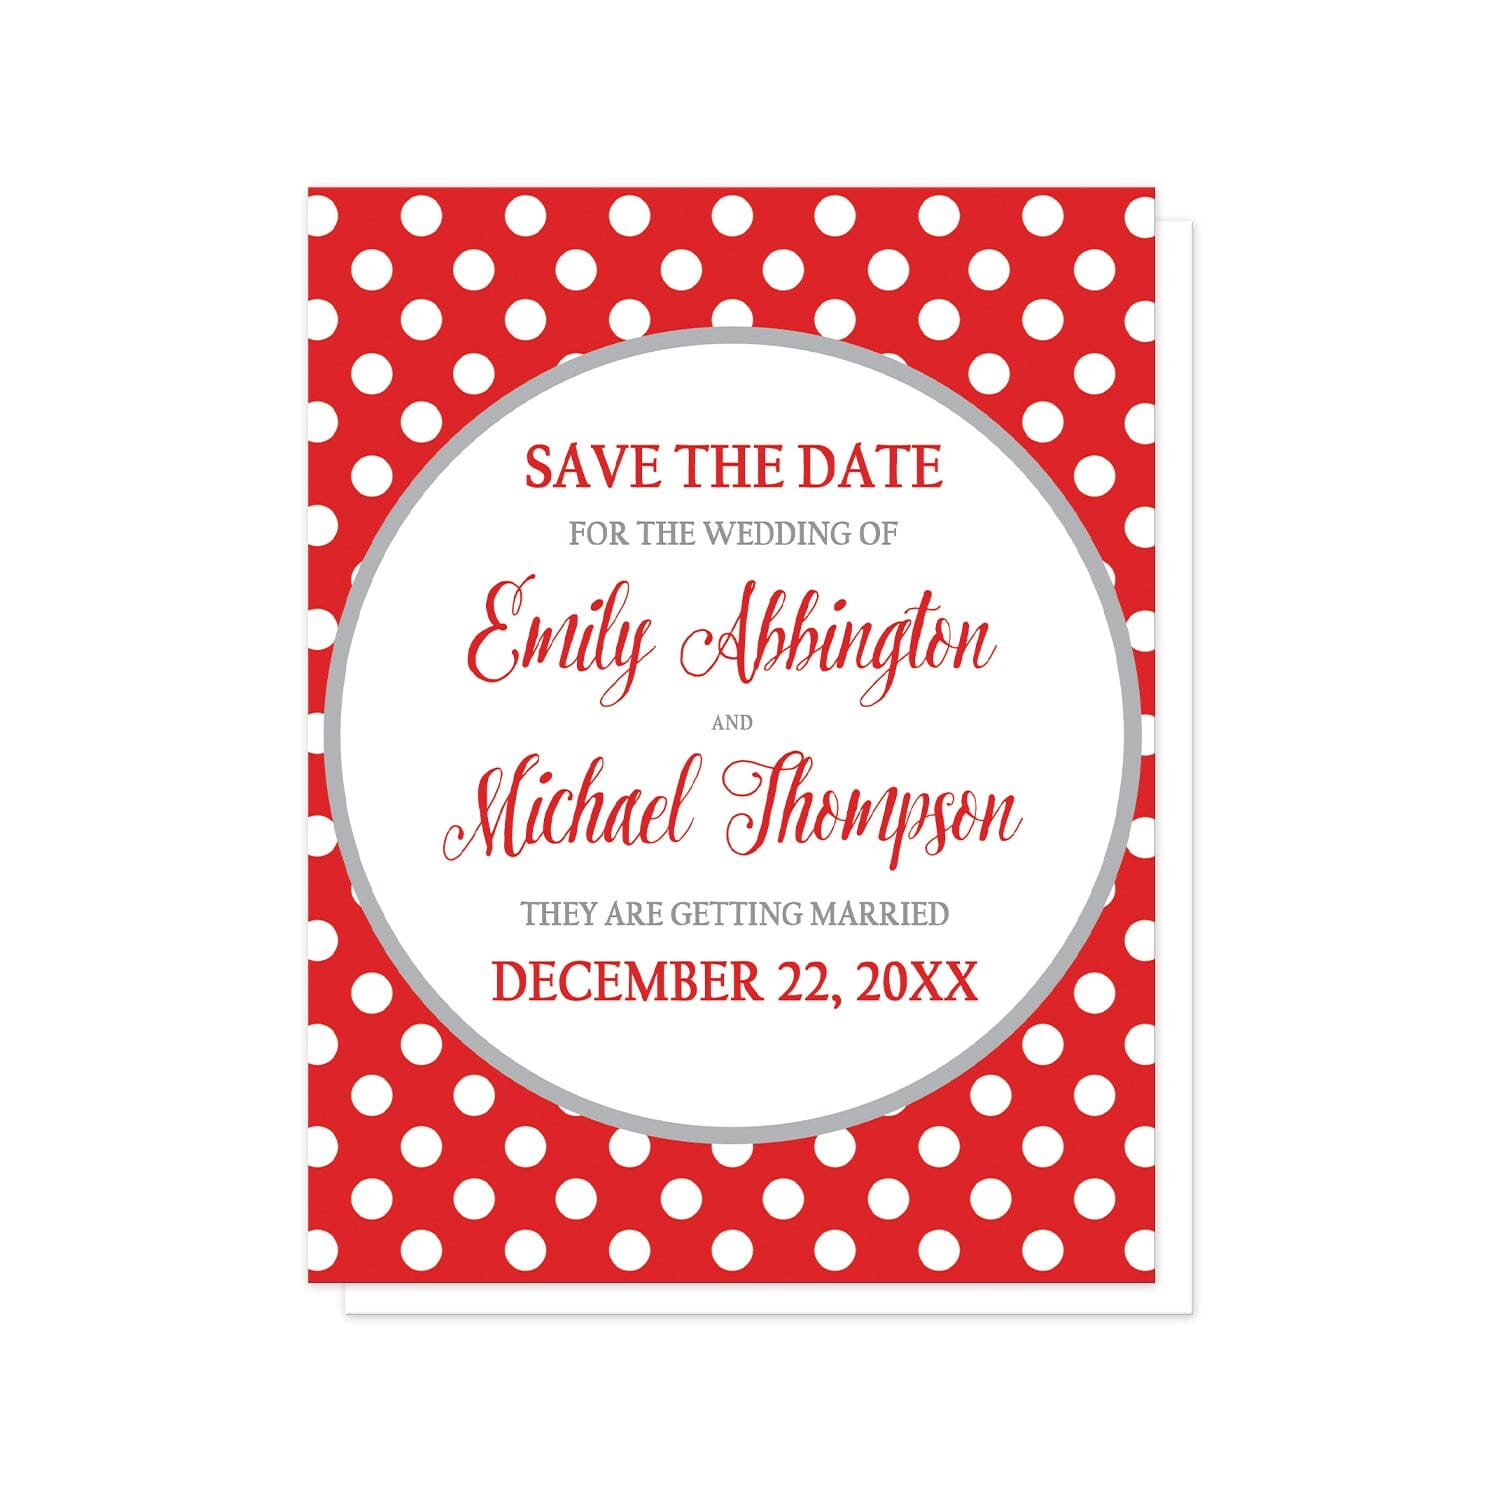 Gray and Red Polka Dot Save the Date Cards at Artistically Invited. Gray and red polka dot save the date cards with your personalized wedding date announcement details custom printed in red and gray inside a white circle outlined in light gray, over a red polka dot pattern with white polka dots over red.